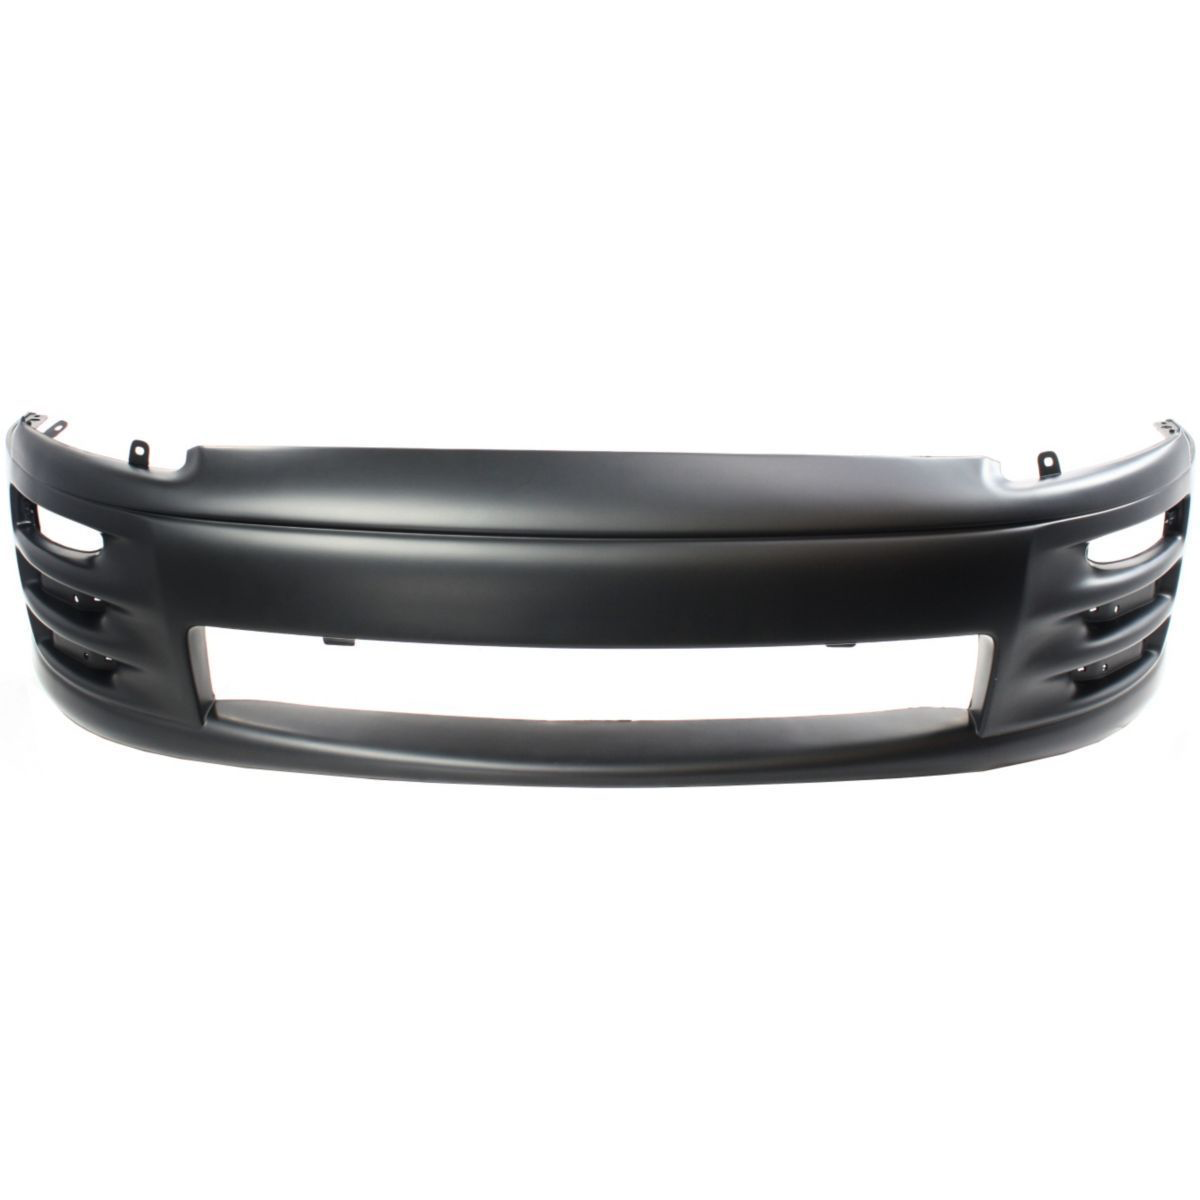 2000-2002 MITSUBISHI ECLIPSE Front Bumper Cover Painted to Match